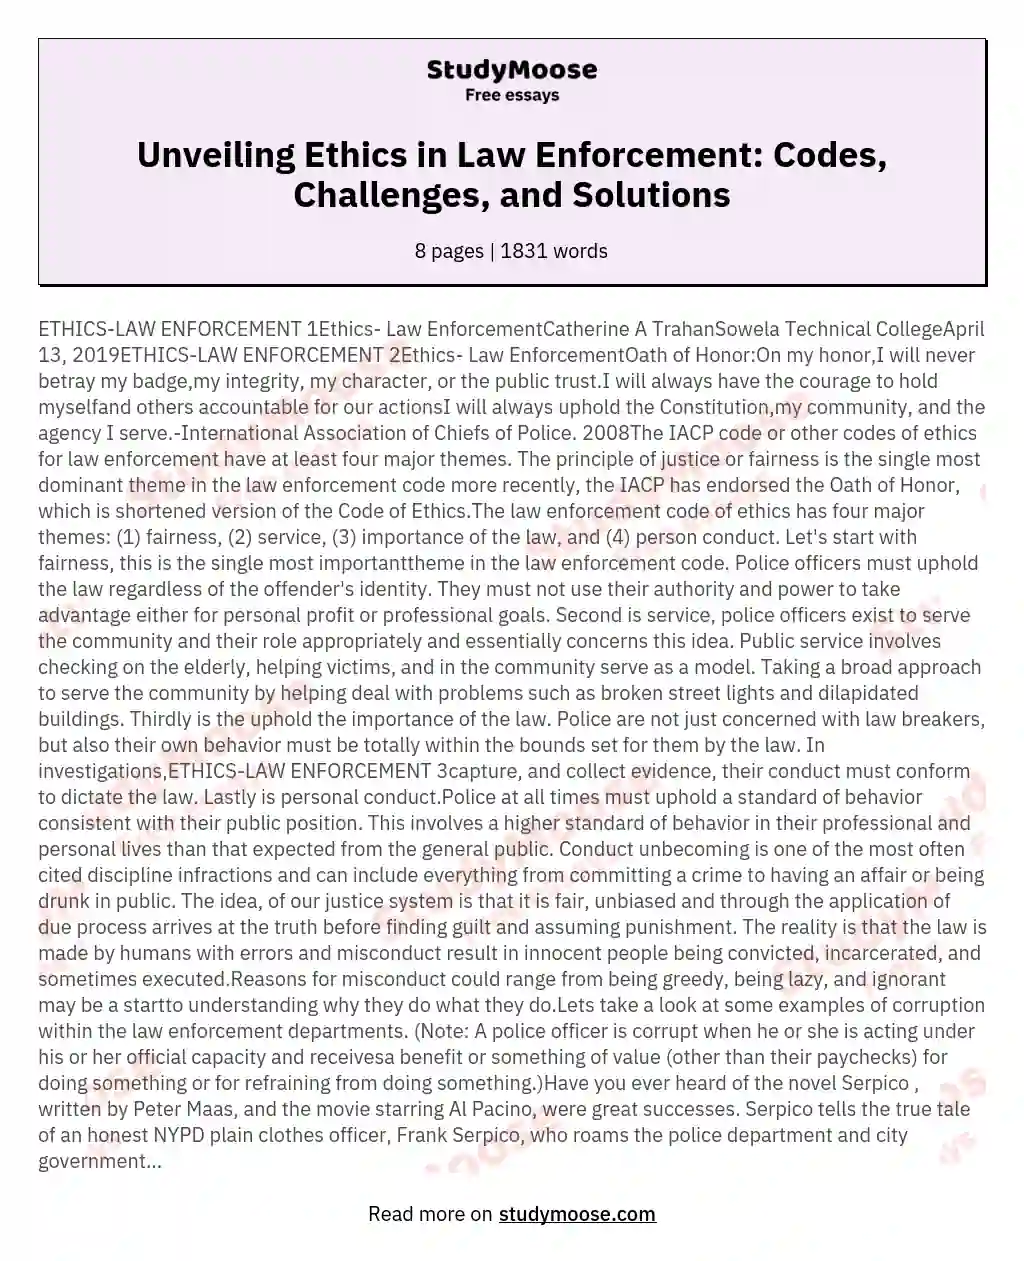 Unveiling Ethics in Law Enforcement: Codes, Challenges, and Solutions essay